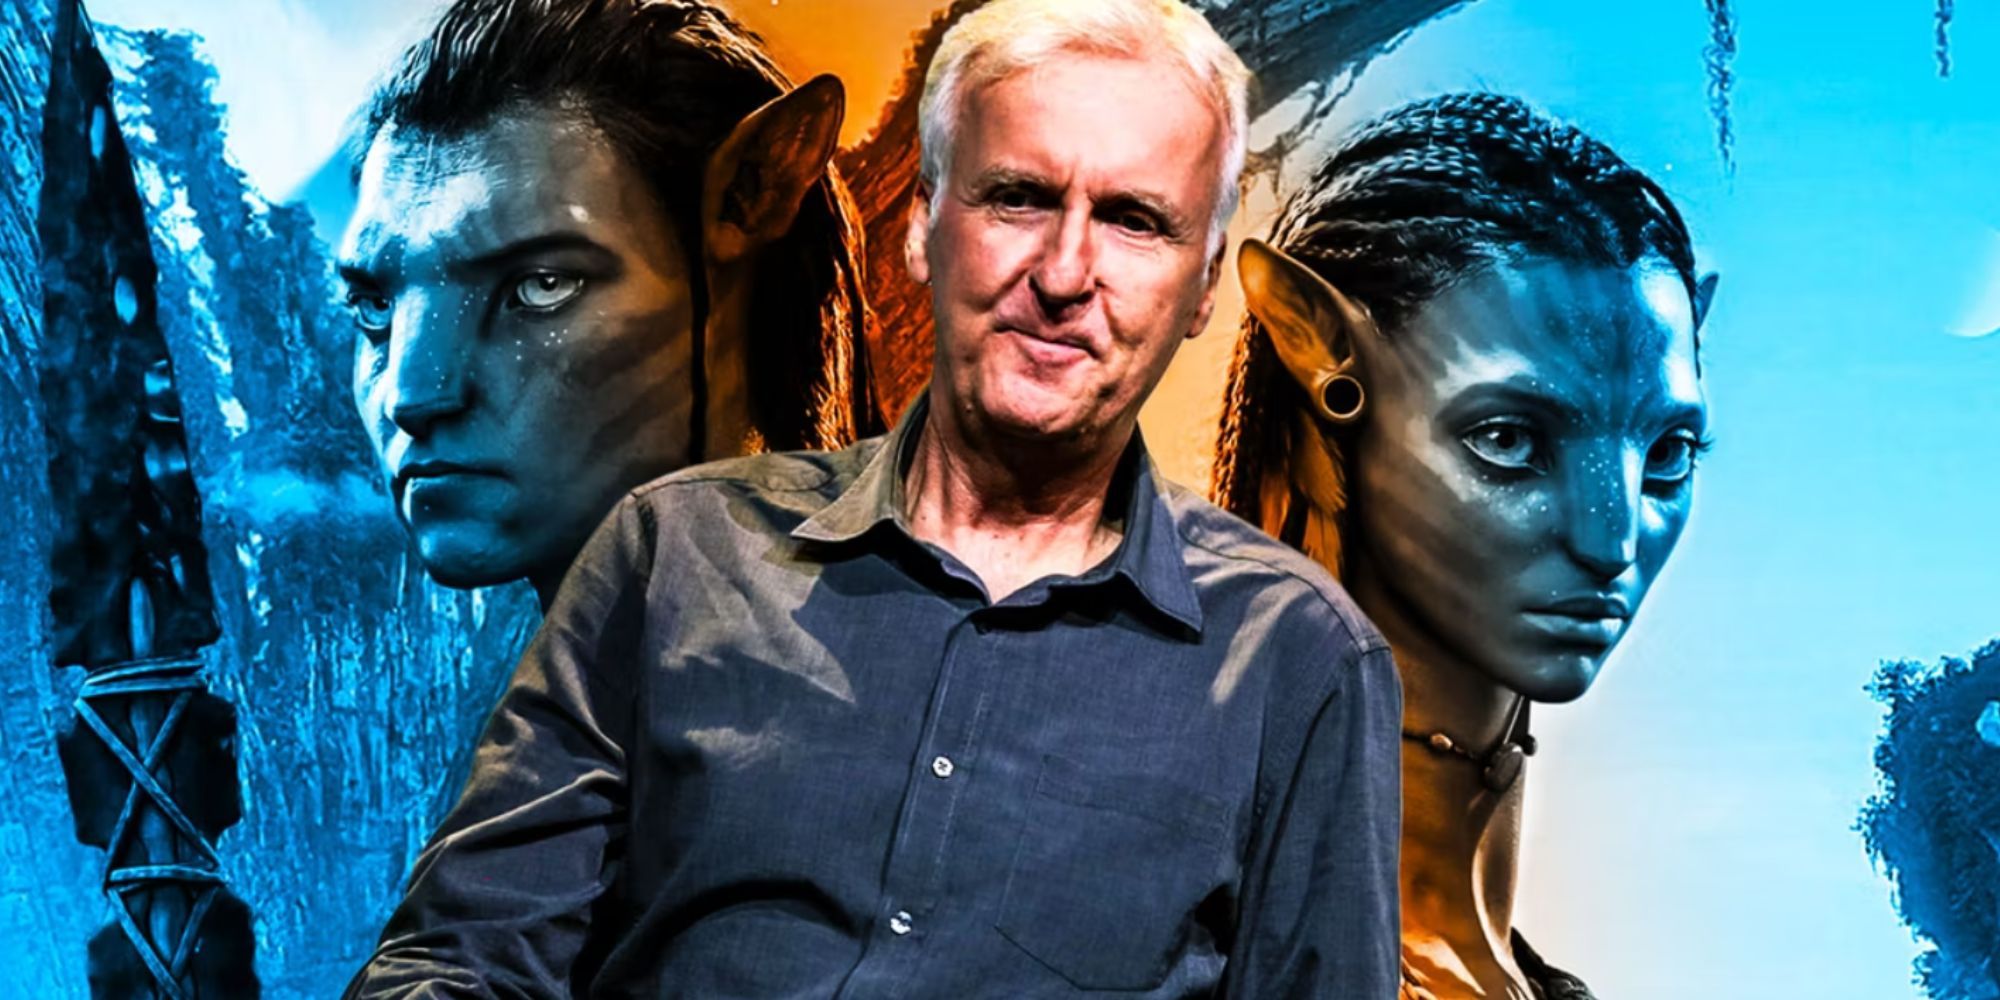 Composite image of two characters from Avatar and James Cameron